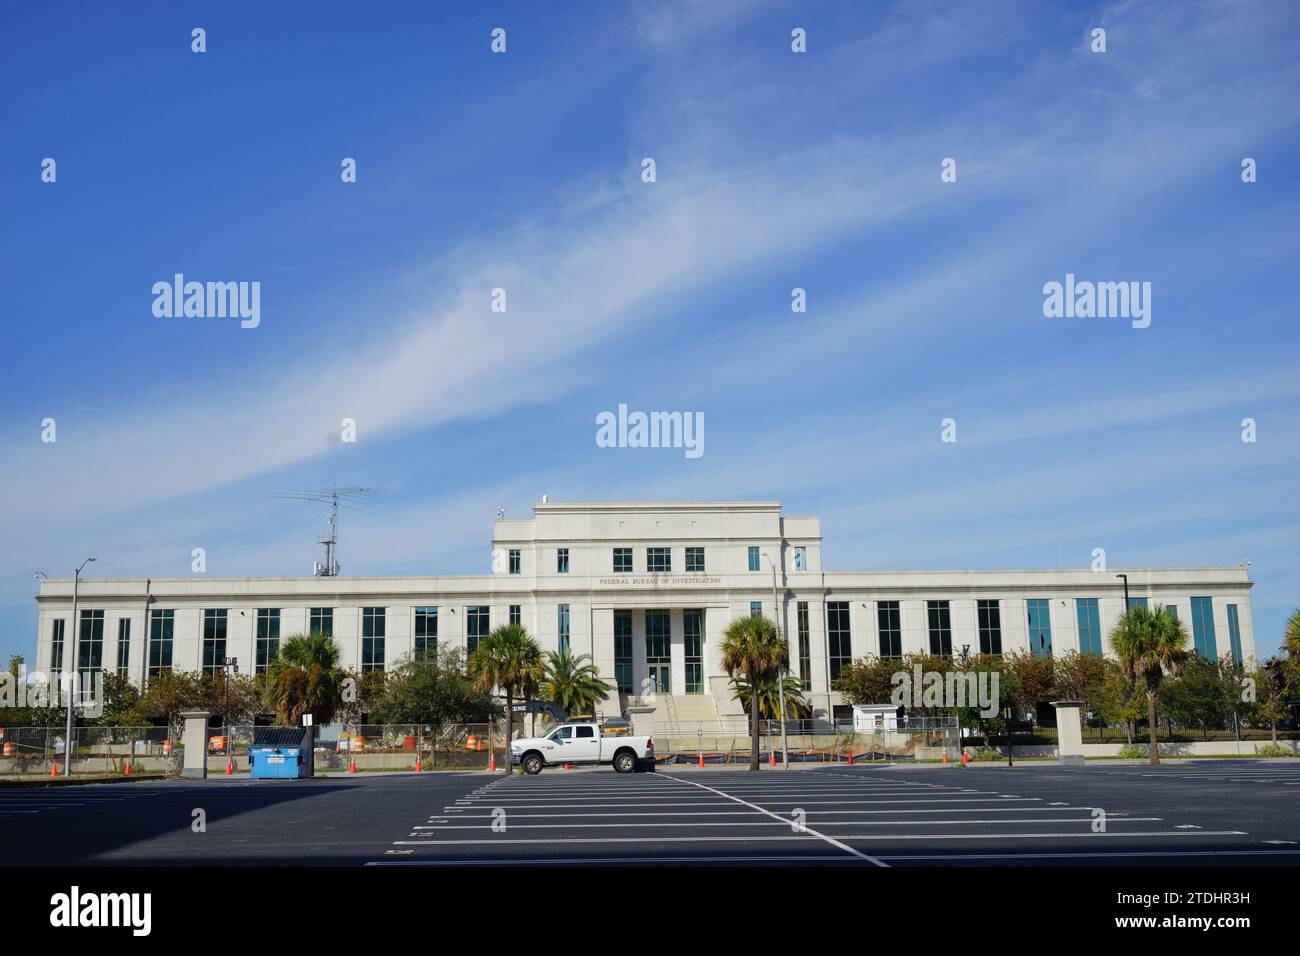 Federal Presence: The FBI Building in Mobile, Alabama, under a Broad Blue Sky, Symbolizing Law and Order. Stock Photo